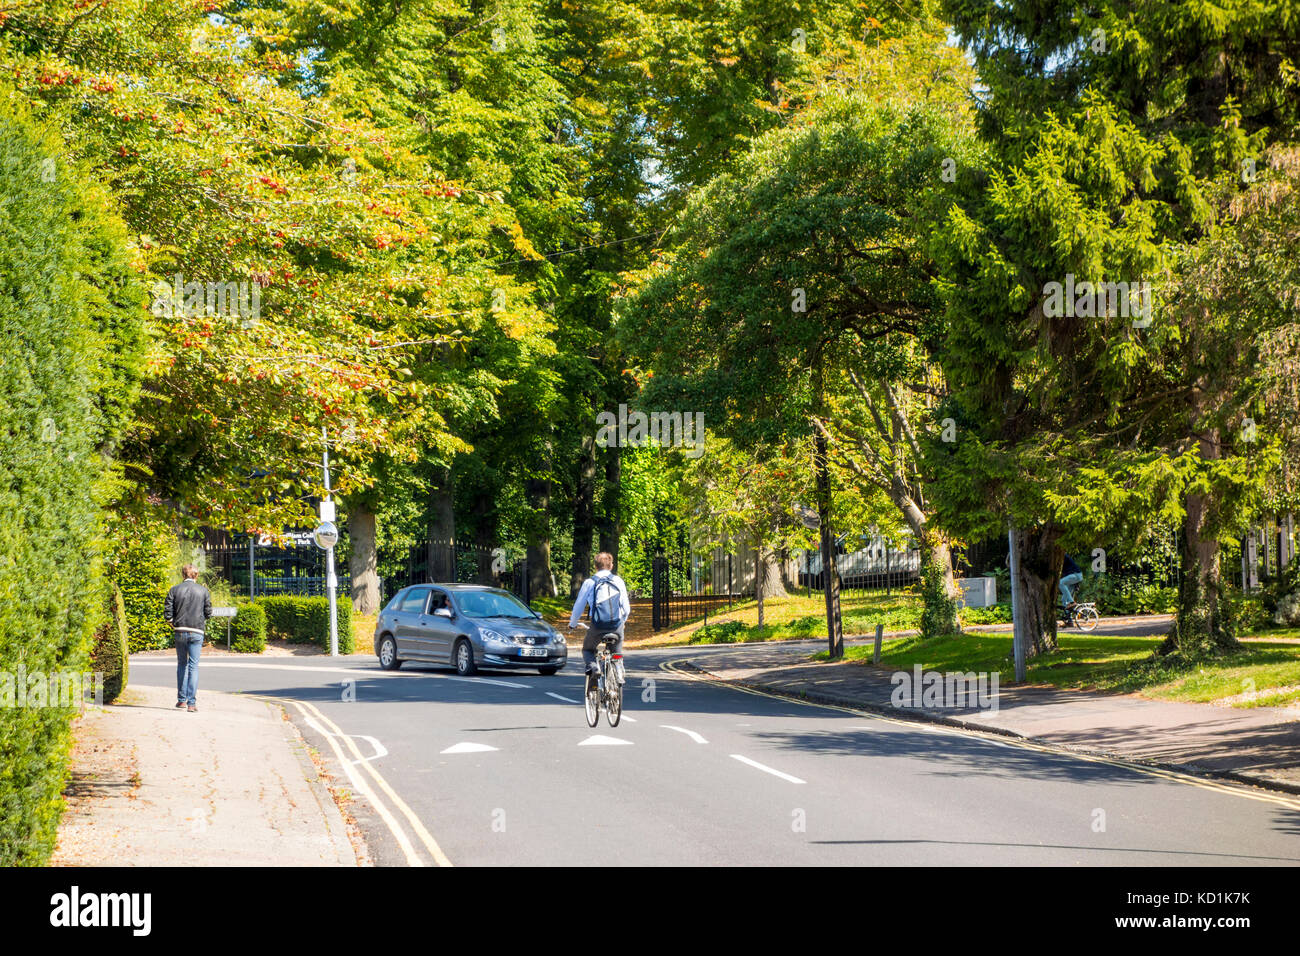 Storey's Way, tree lines street in Cambridge, UK with cyclist and car Stock Photo